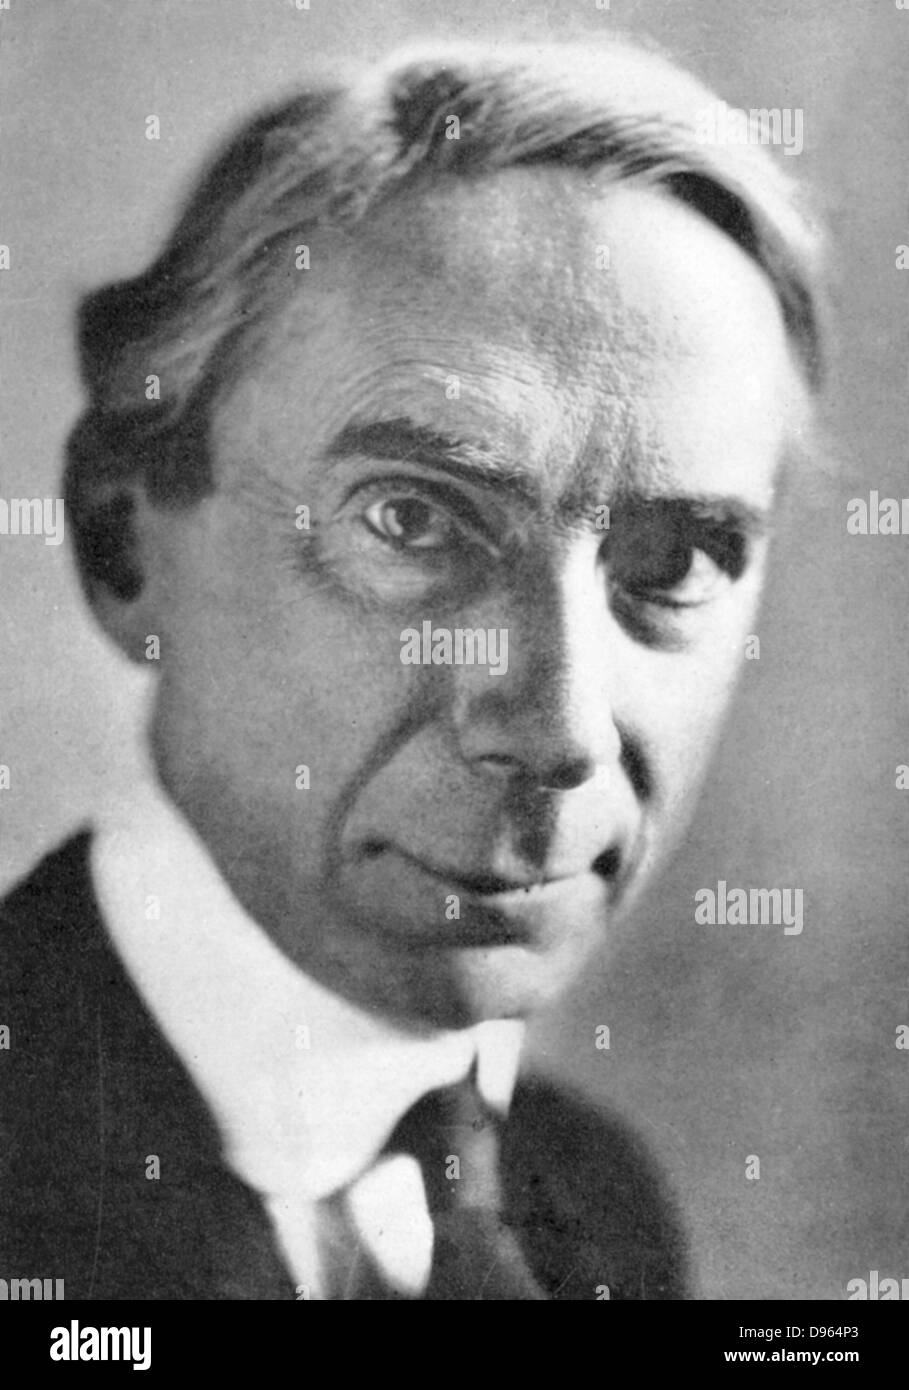 Bertrand Arthur William Russell, 3rd Earl Russell (1872-1970). British philosopher and mathematician. Nobel prize for literature 1950. Stock Photo